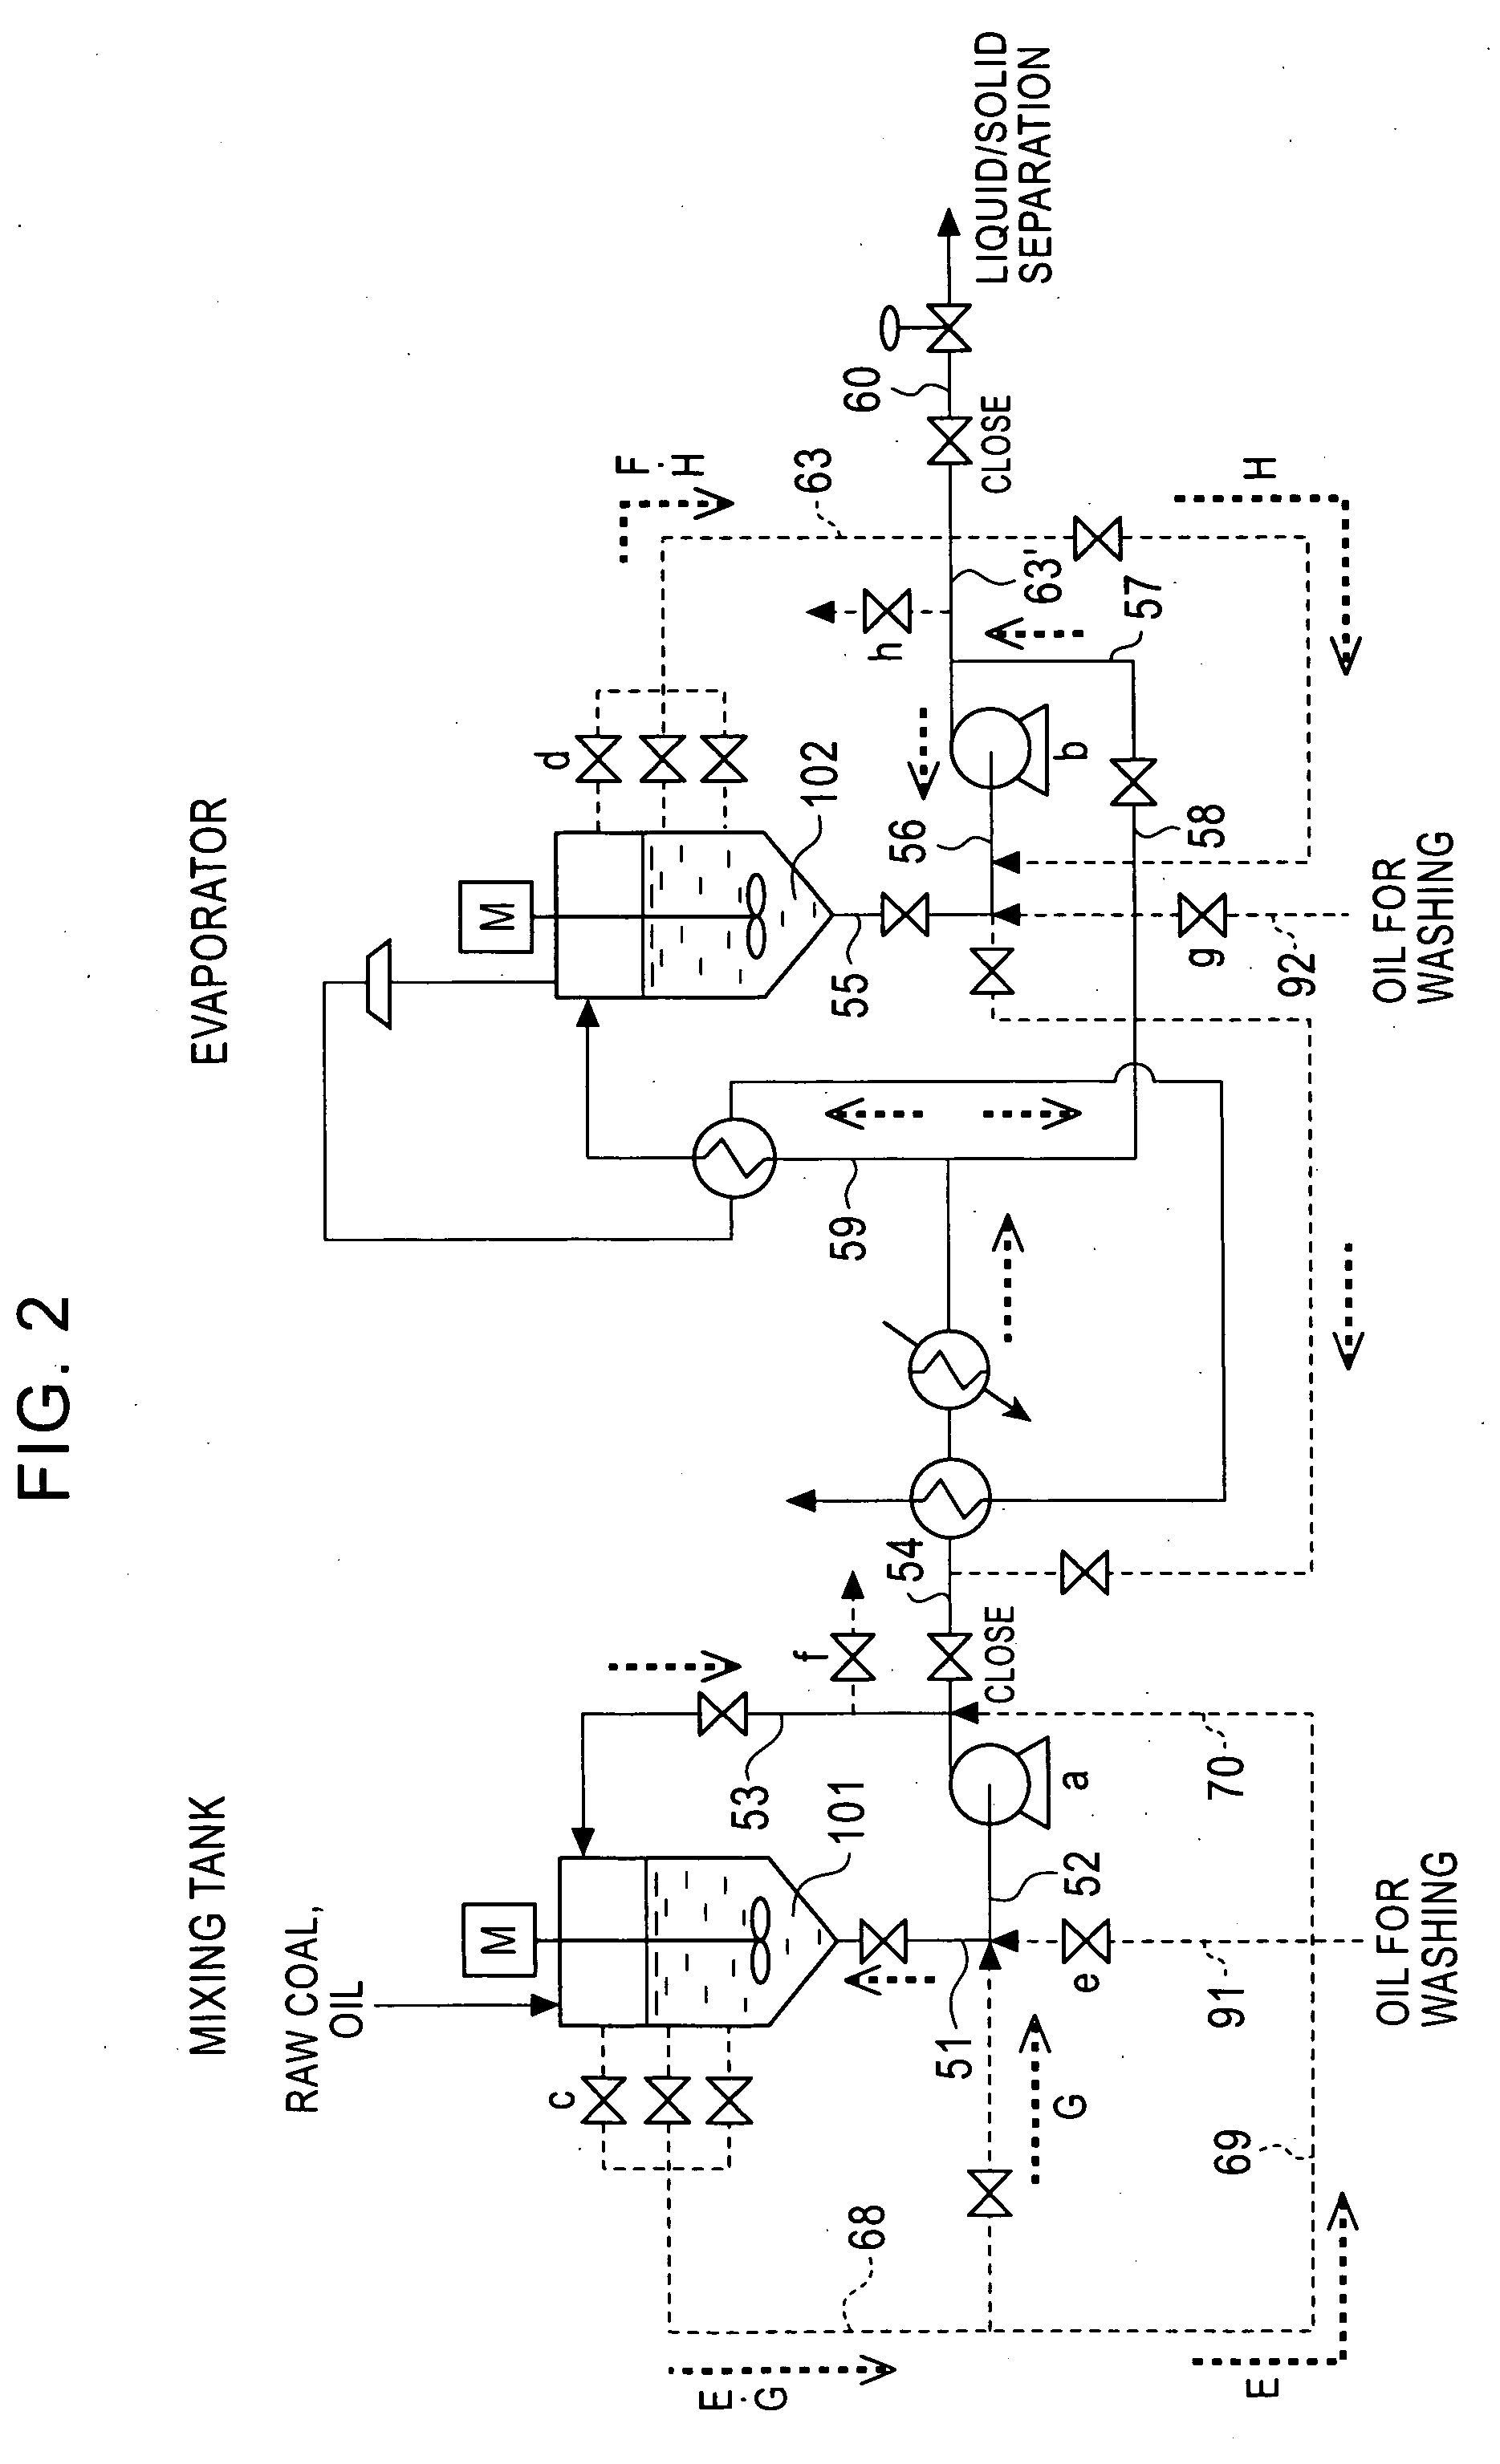 Apparatus and method for producing solid fuel using low-grade coal as raw material